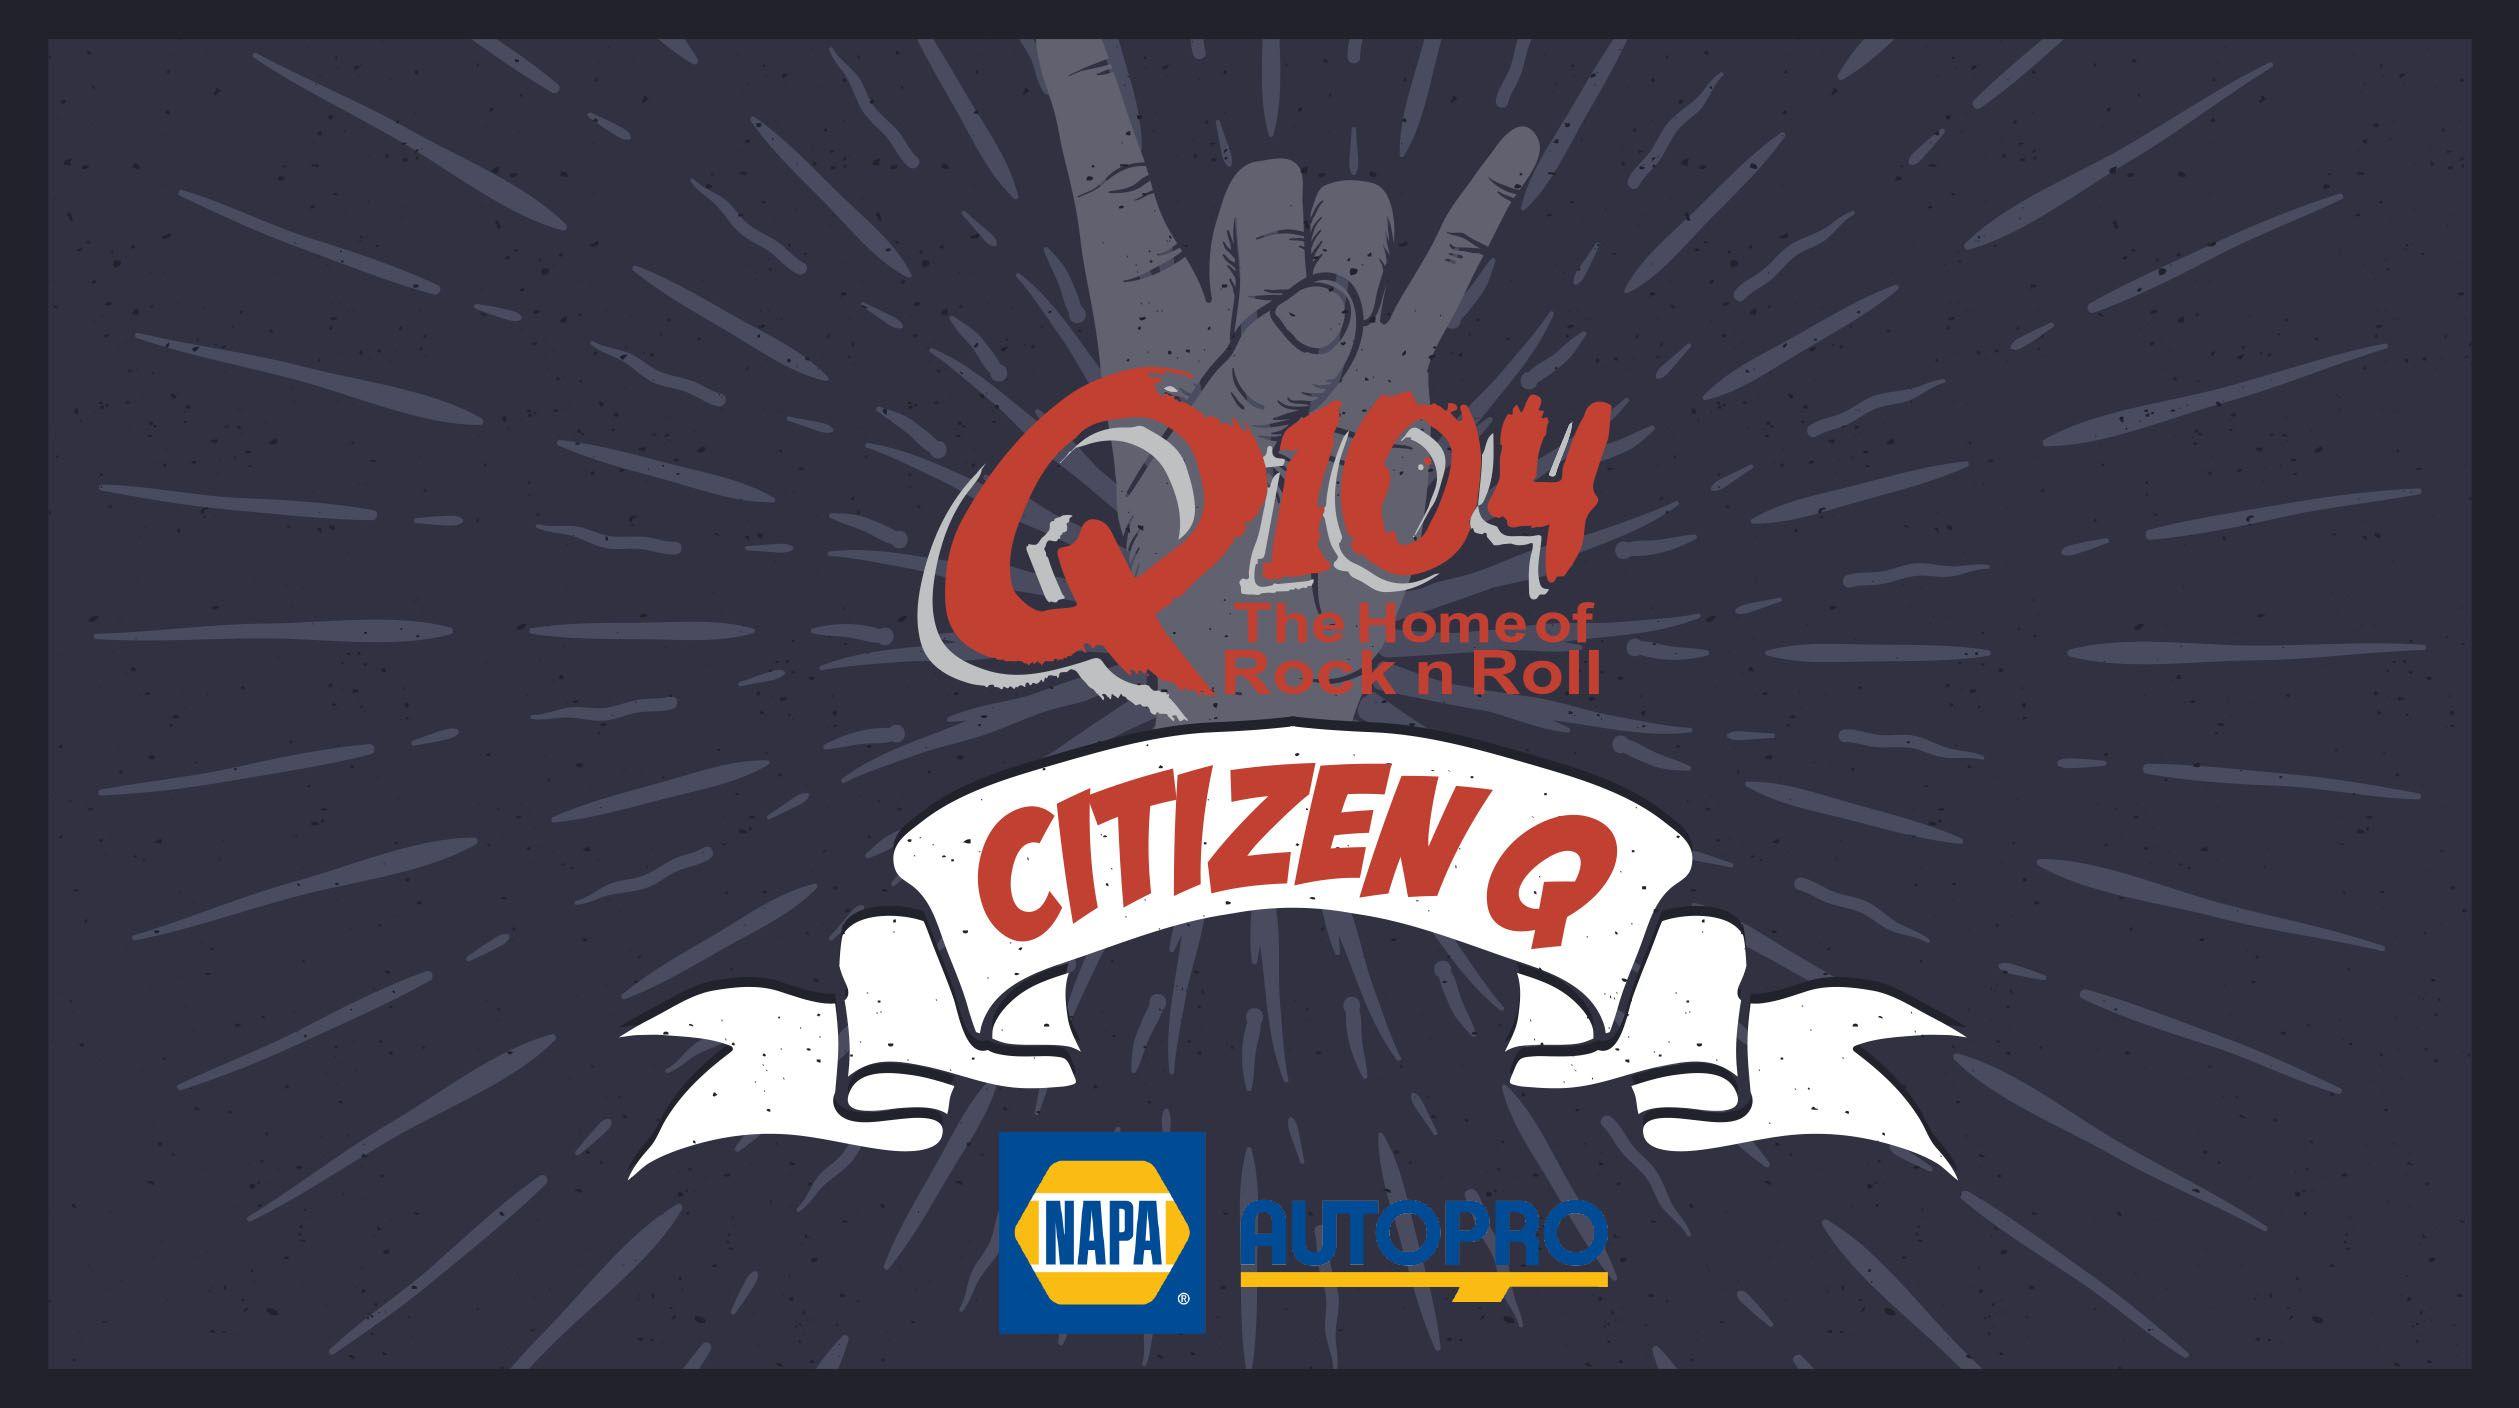 Q104.3 Logo - Citizen Q. Q104 Home of Rock and Roll